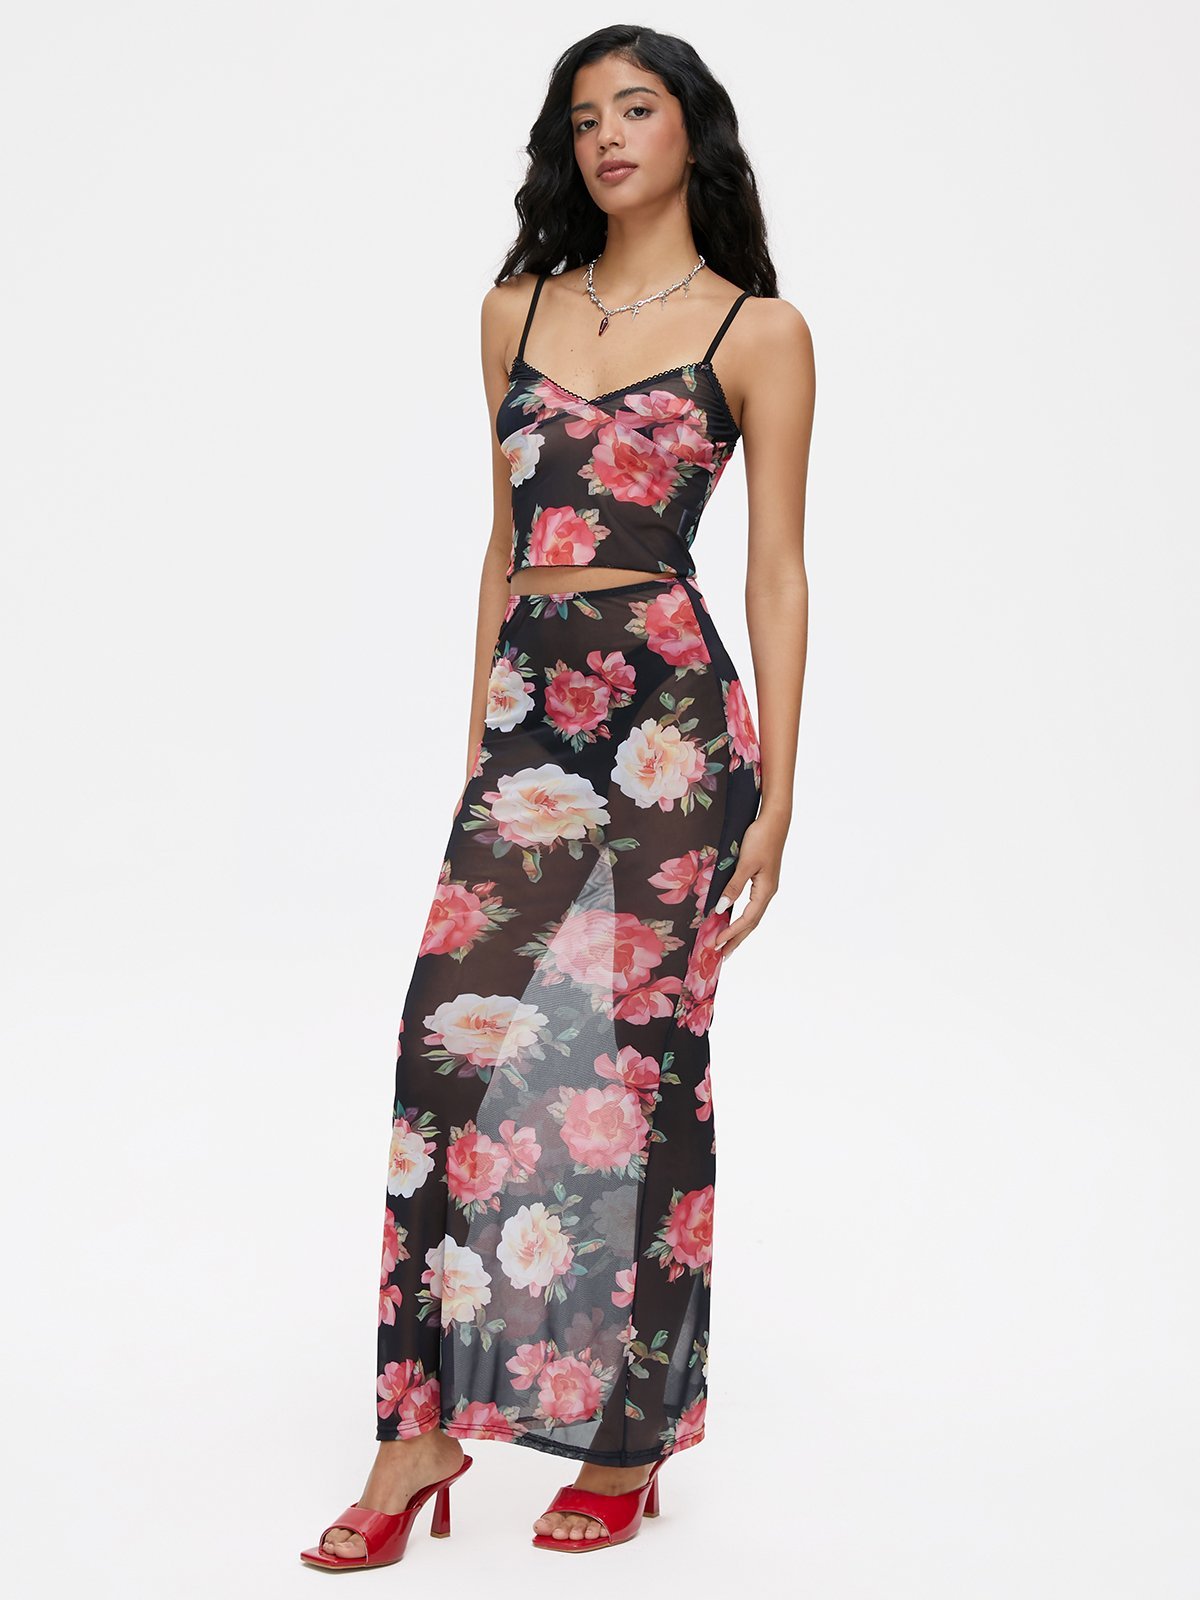 Floral Top With Skirt Two-Piece Set